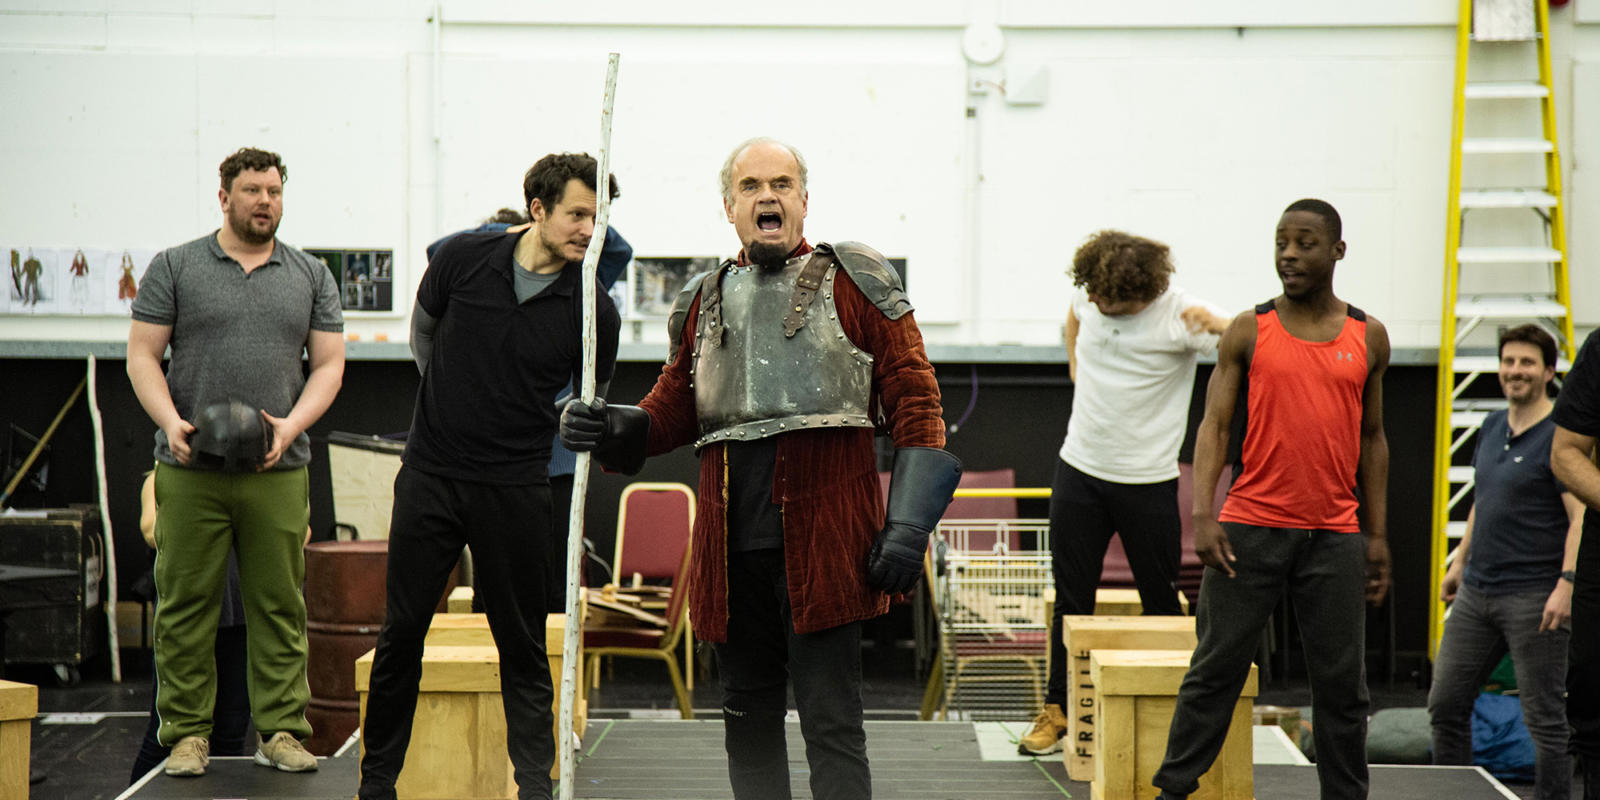 Kelsey Grammer in armour and with a stick in rehearsal with other actors